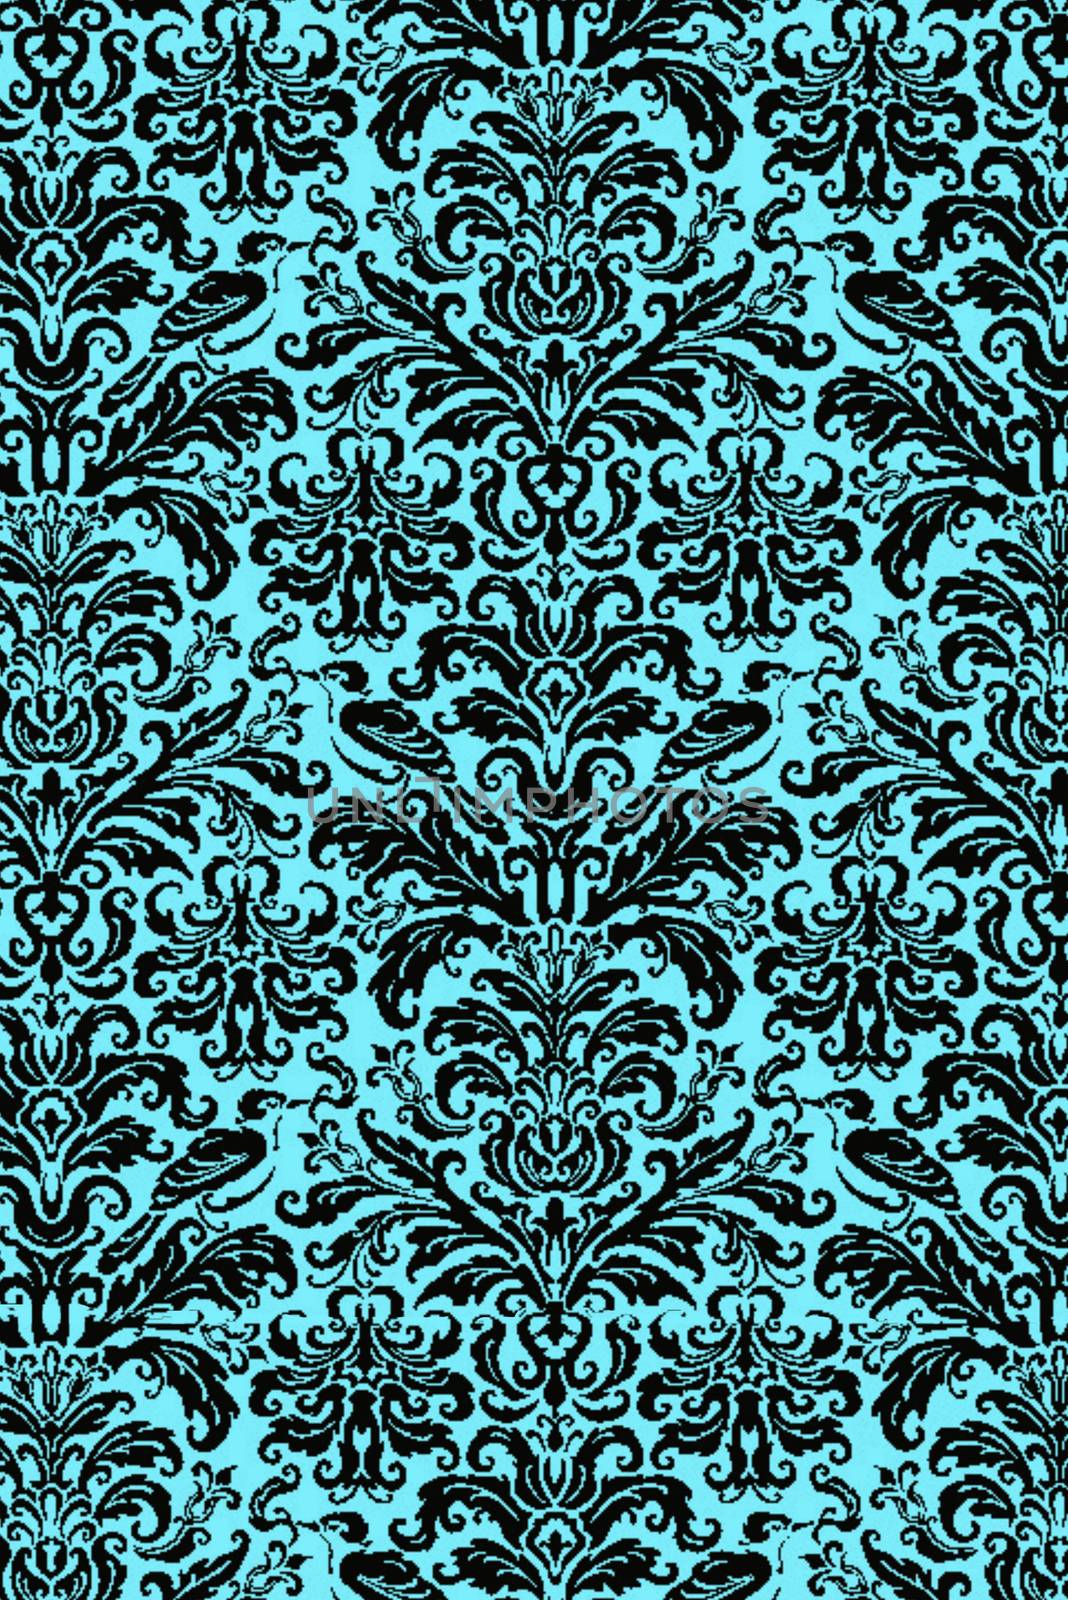 Vintage floral seamless patten. Classic Baroque wallpaper. Black and teal blue